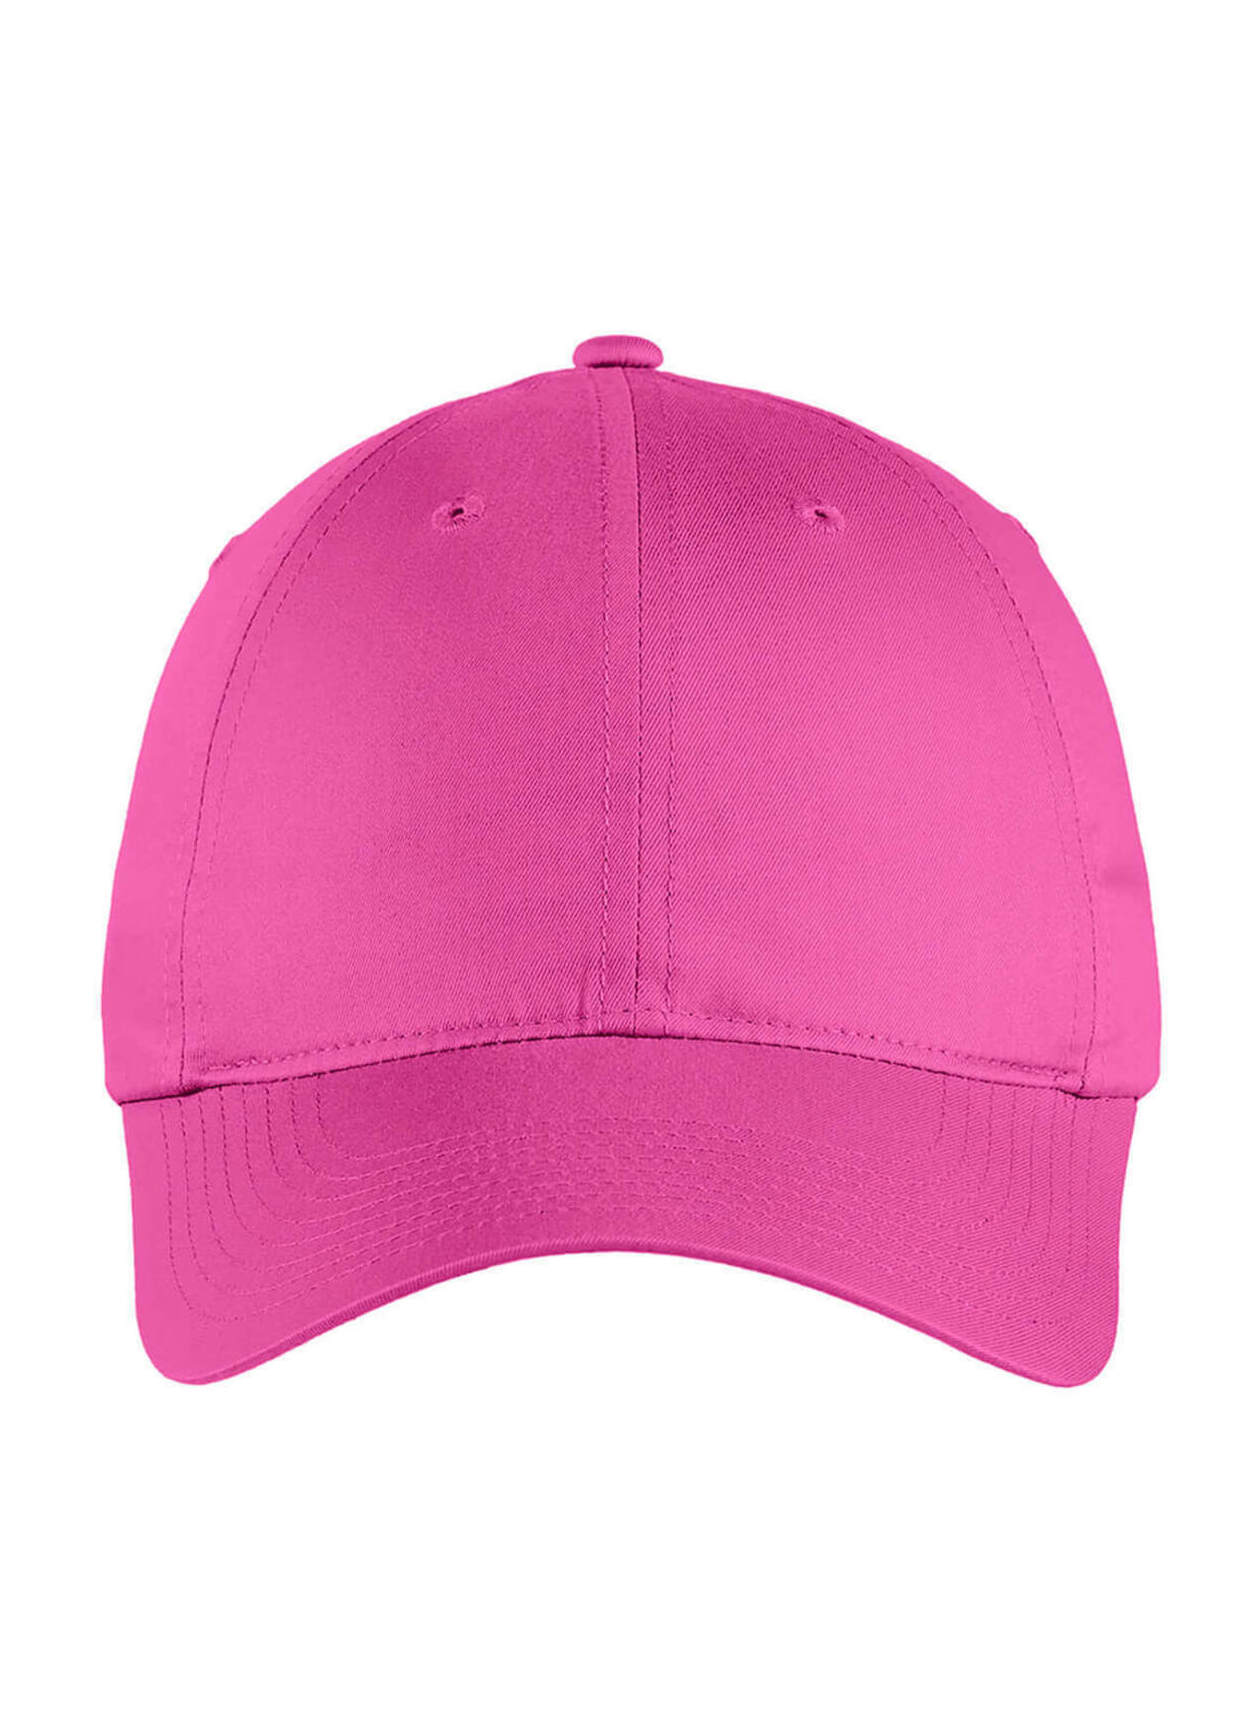 Nike Fusion Pink Unstructured Twill Hat